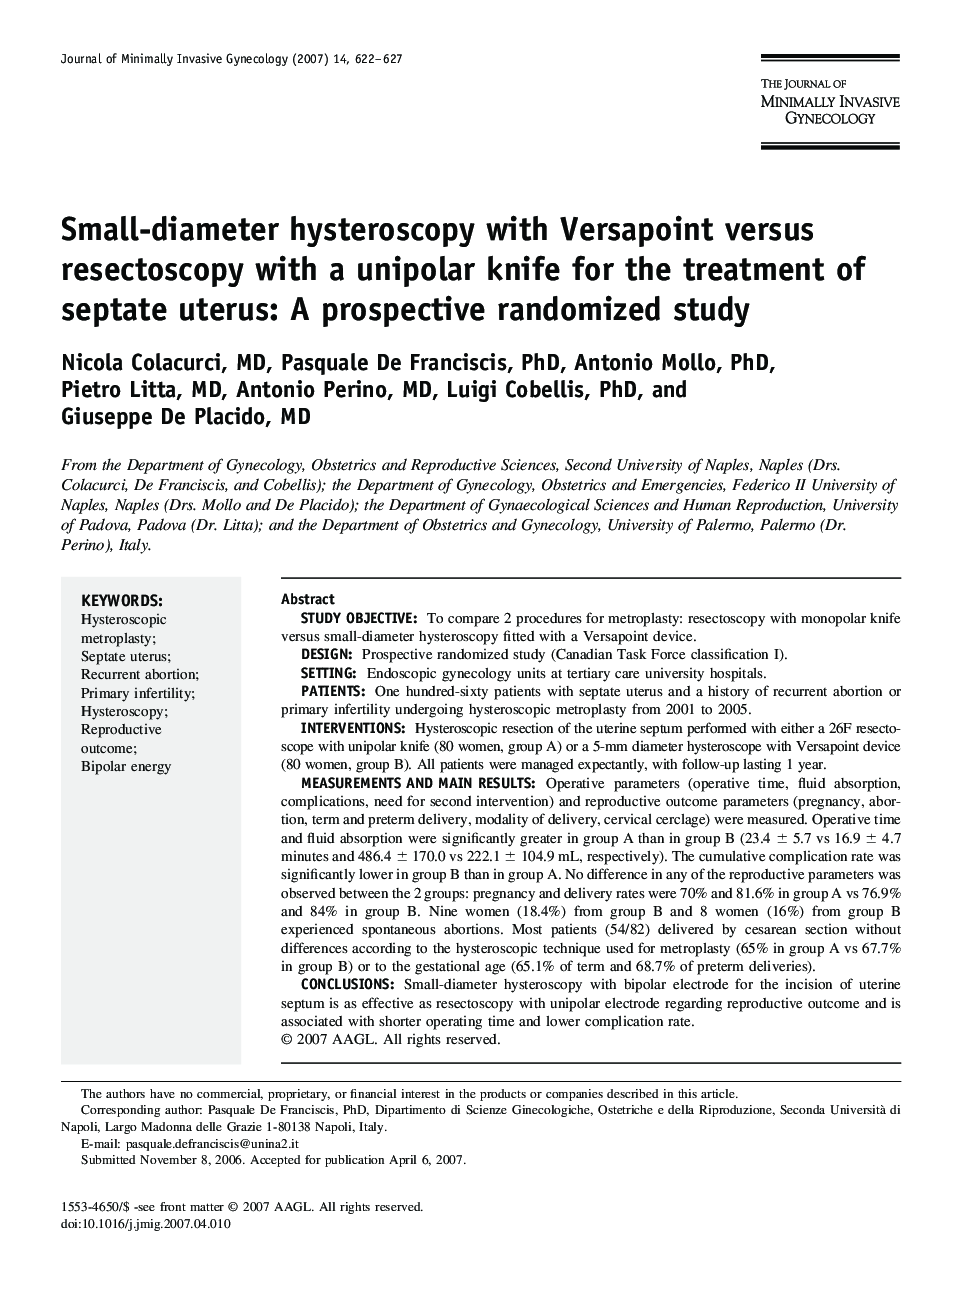 Small-diameter hysteroscopy with Versapoint versus resectoscopy with a unipolar knife for the treatment of septate uterus: A prospective randomized study 